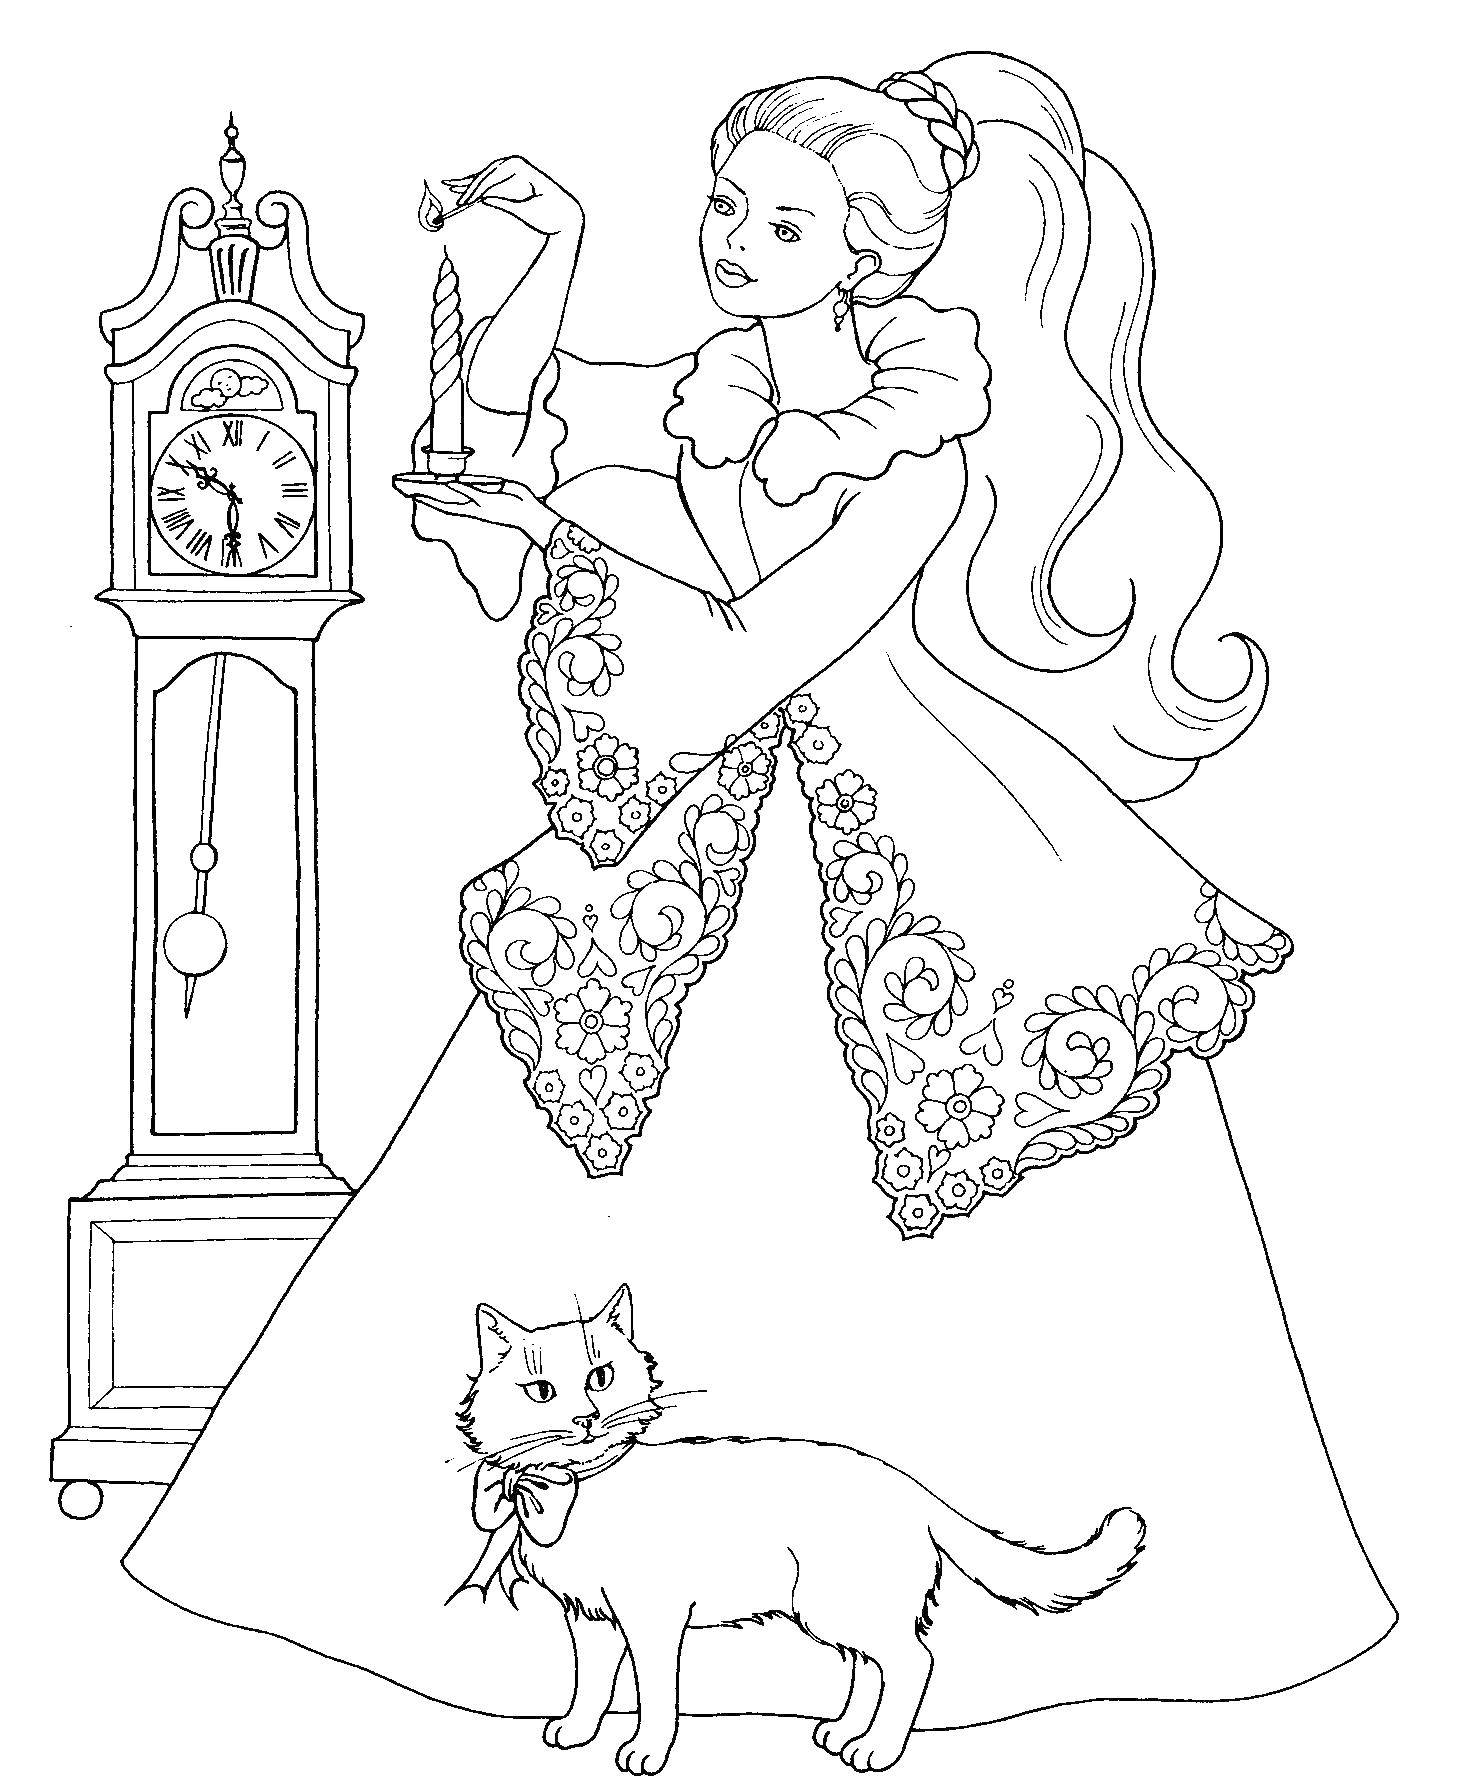 Coloring The Princess and the candle. Category cartoons. Tags:  Princess , candle, cat, clock.